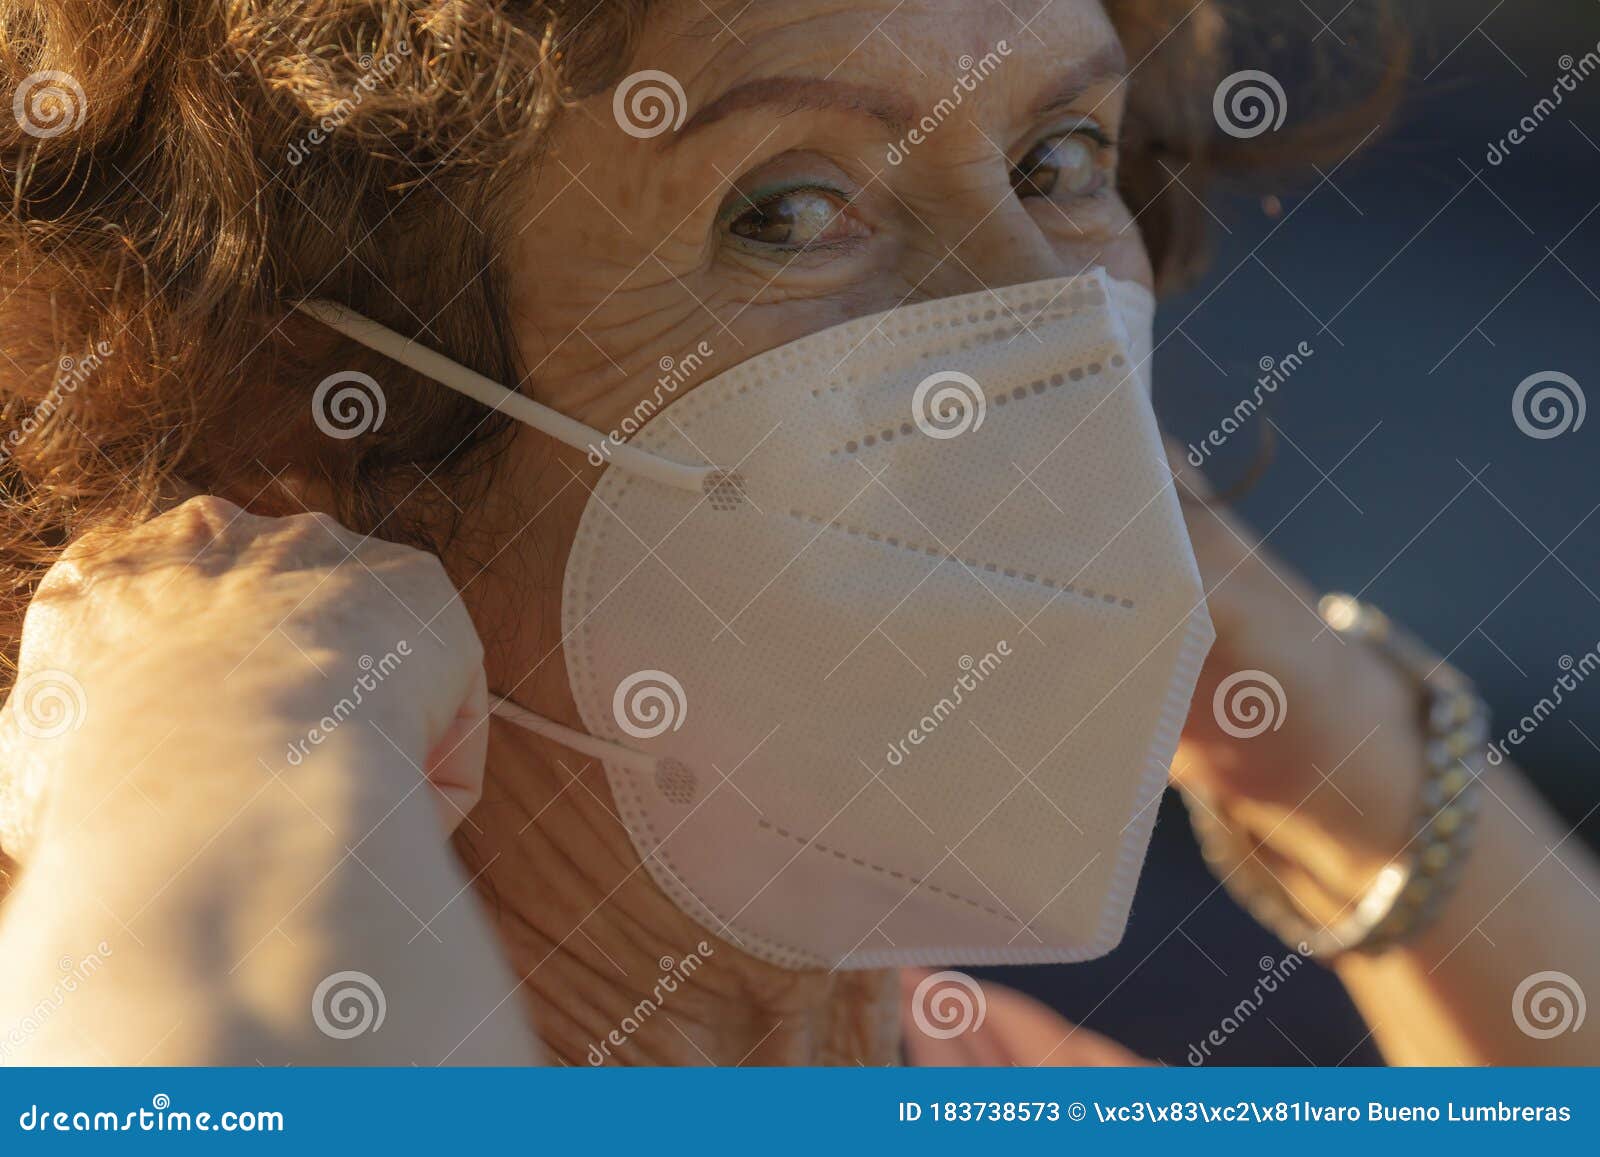 a real woman shows how to put on the protective mask to prevent the spread of the covid-19